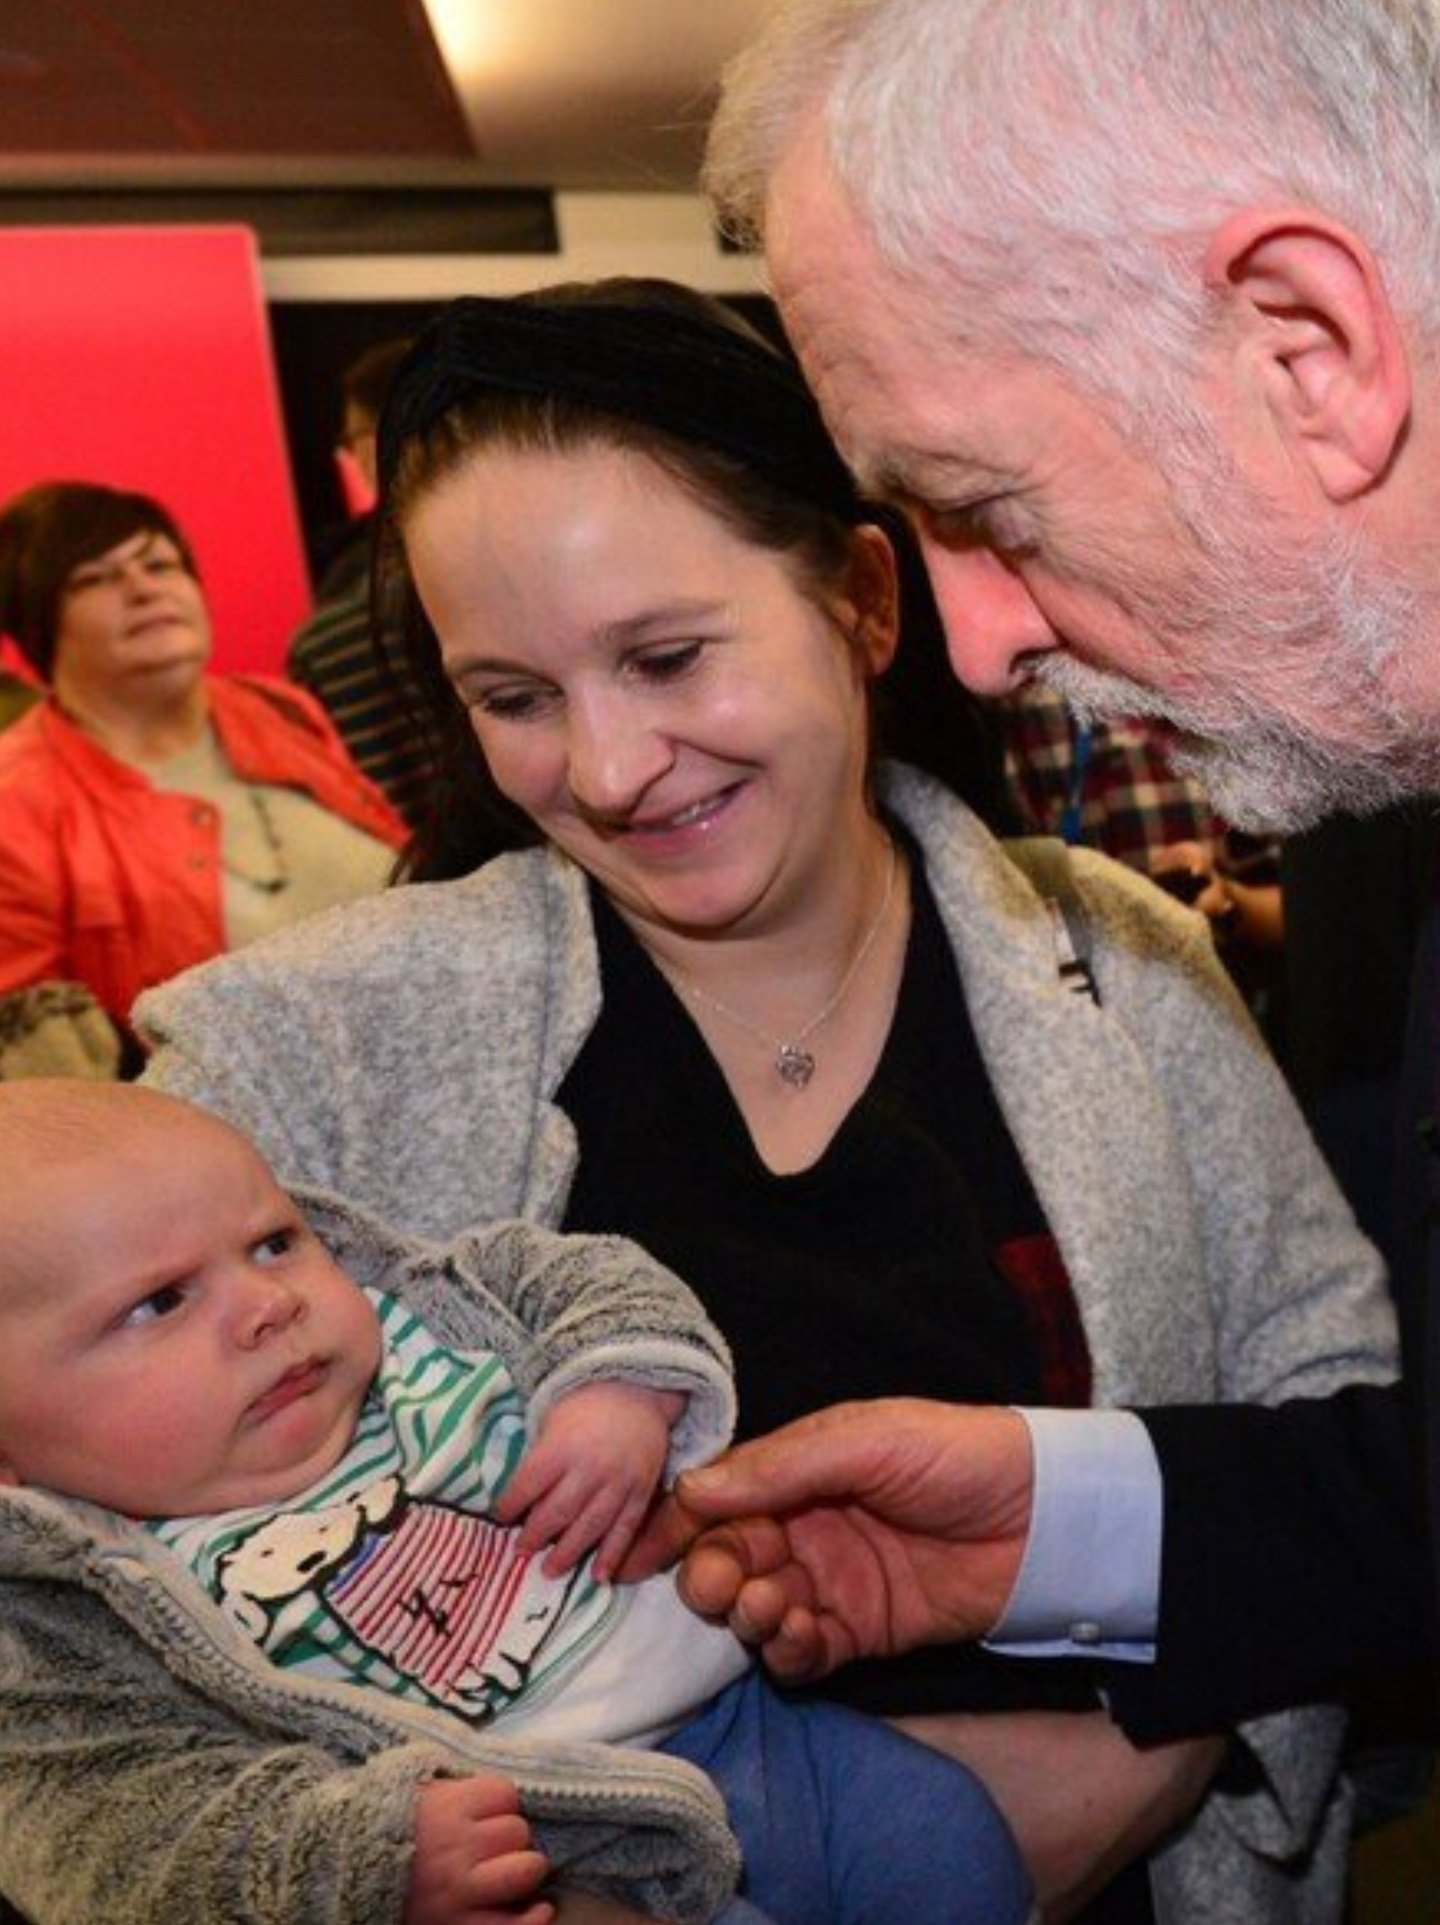 Evan babies Know Corbyn is Worse than a Messy diaper EJb7_lrXkAAZAOE?format=jpg&name=large